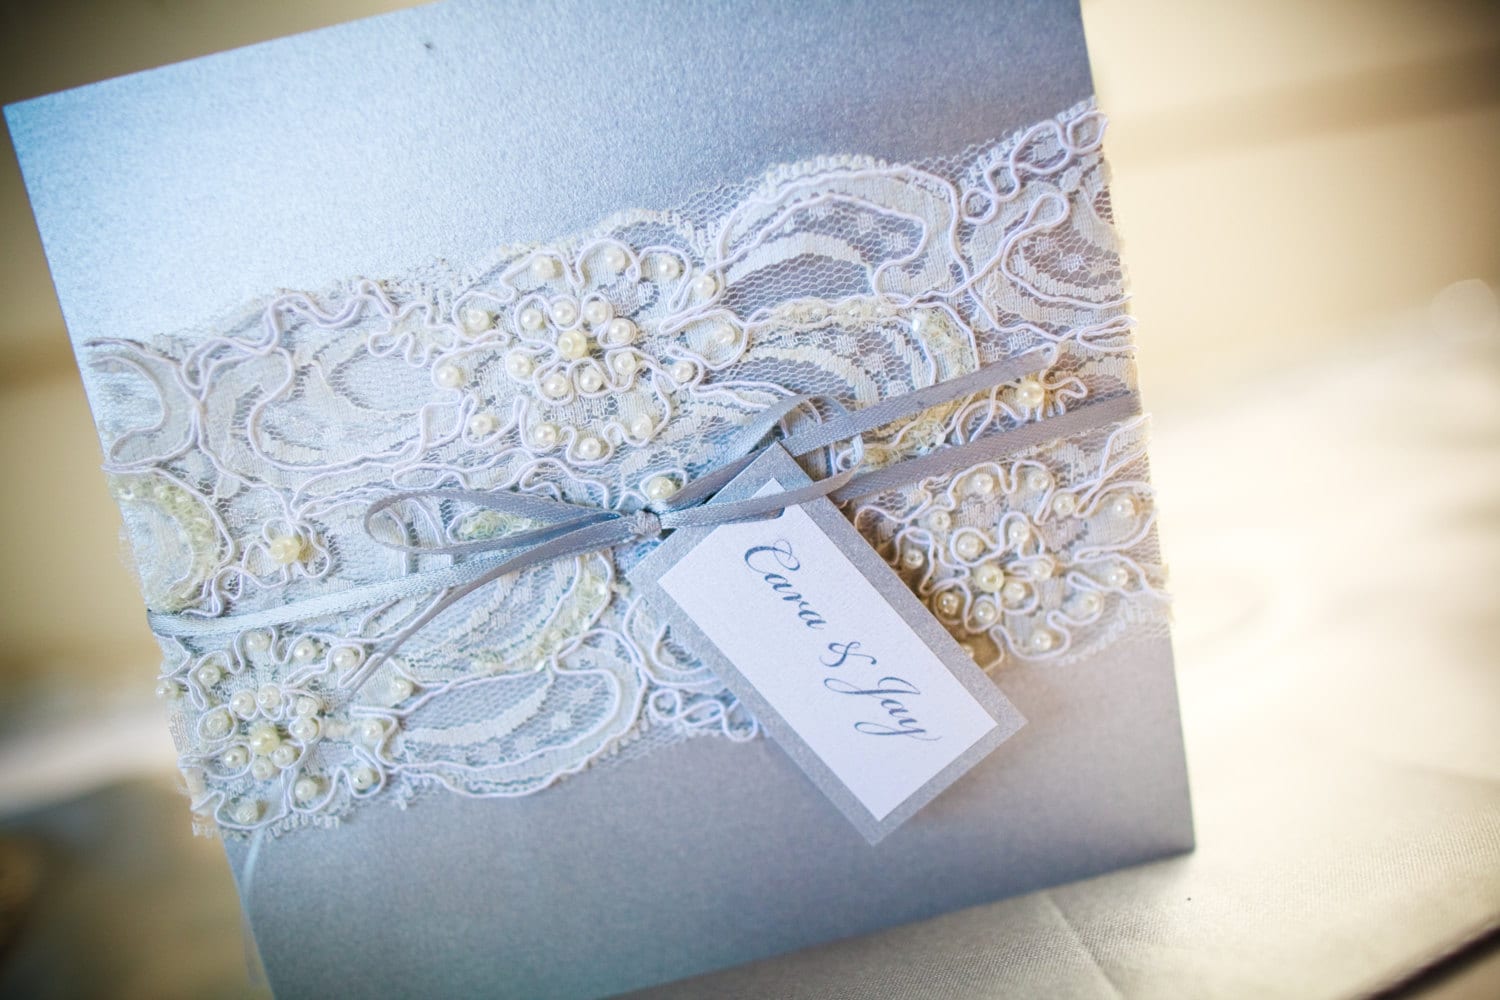 This beaded lace wedding invitation is the perfect addition to a classic